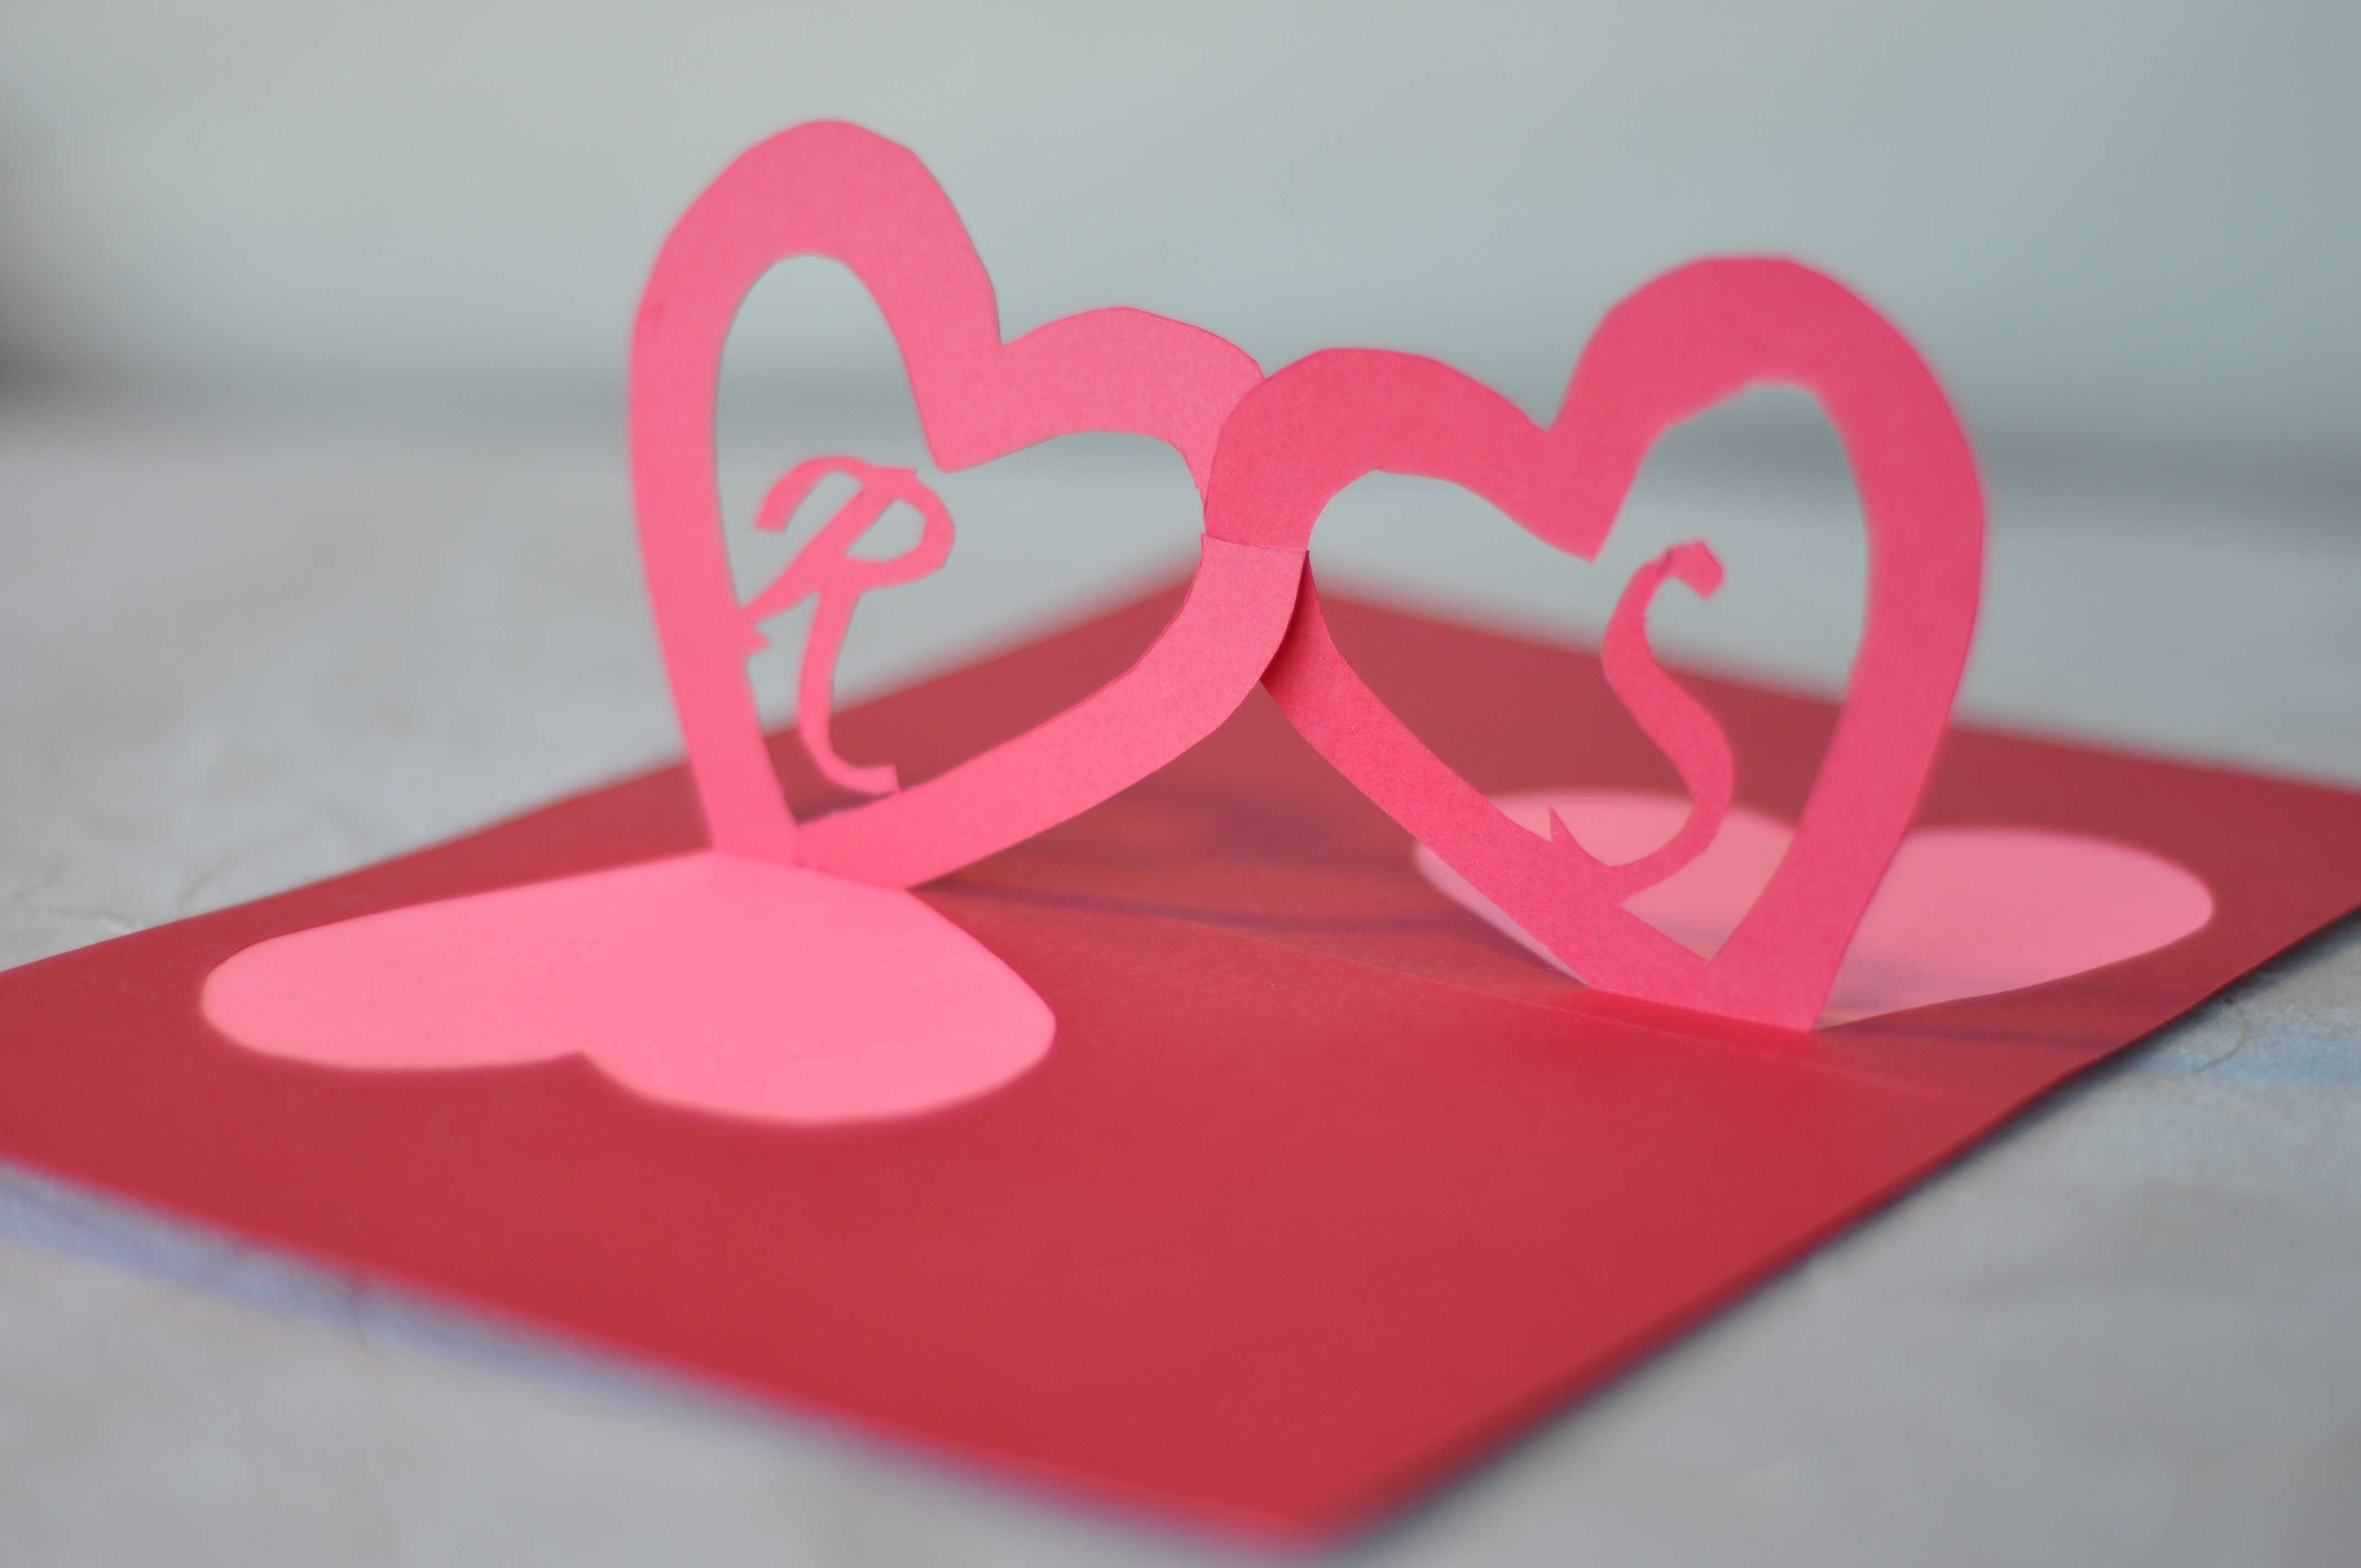 Linked Hearts Pop Up Card Template - Creative Pop Up Cards